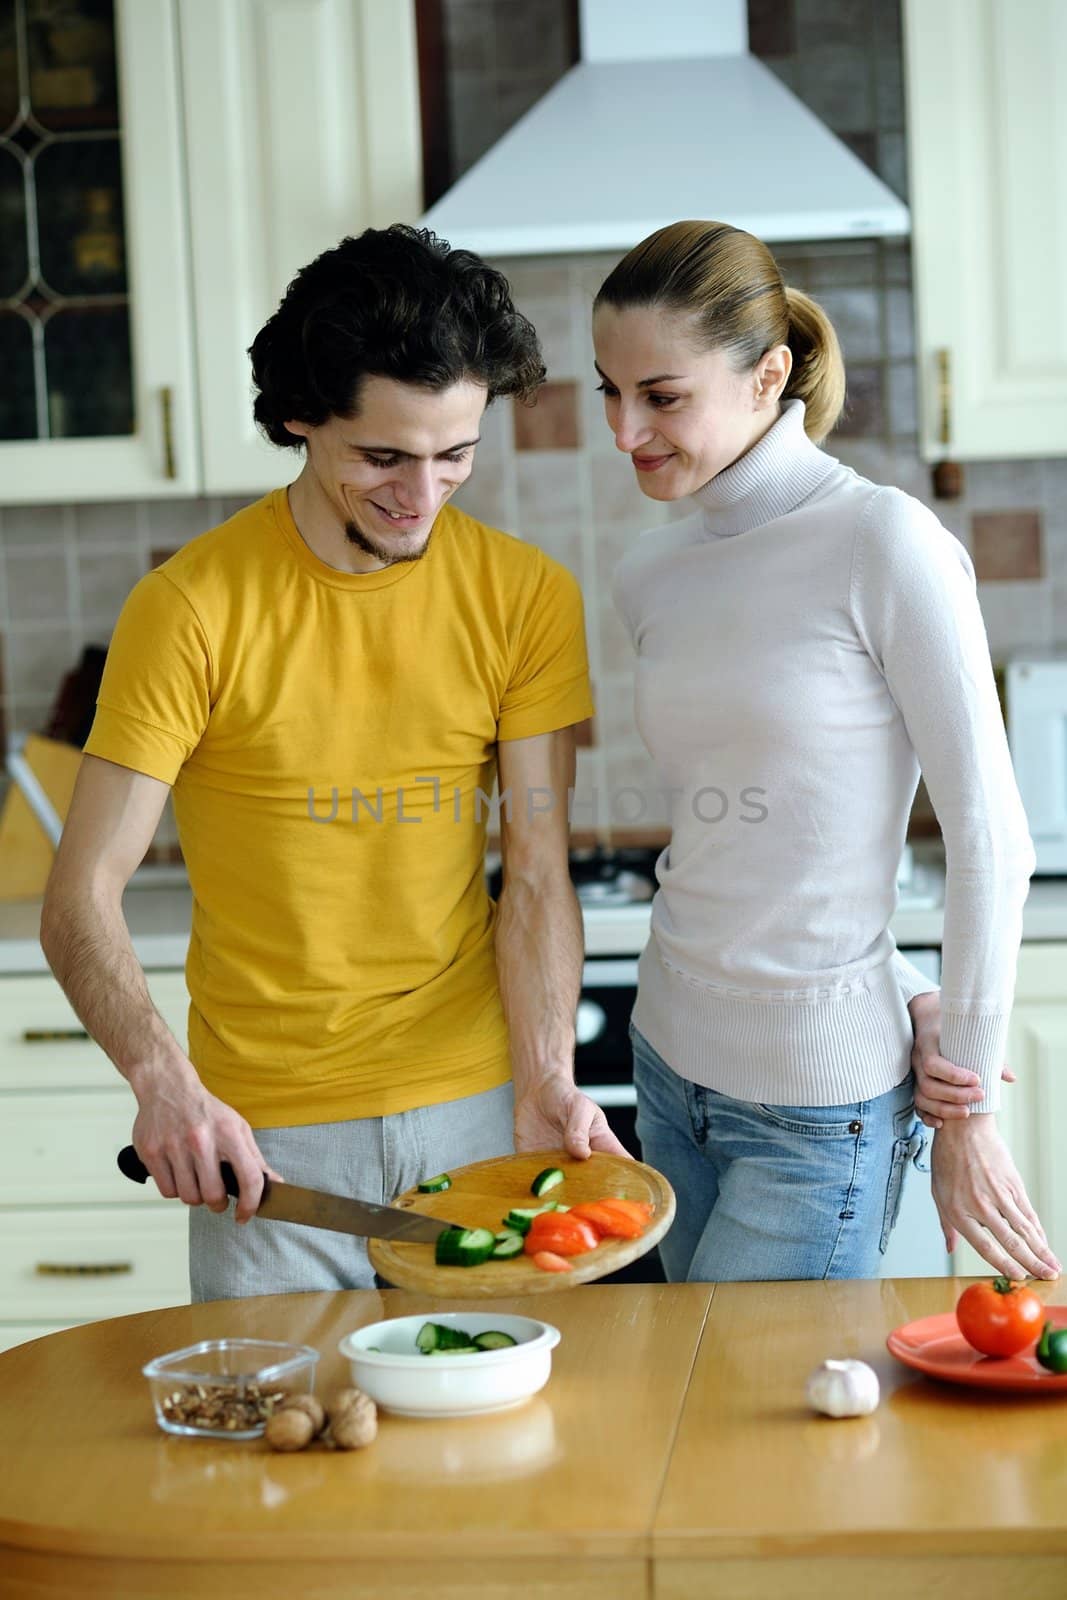 An image of couple in the kichen preparing vegetarian food